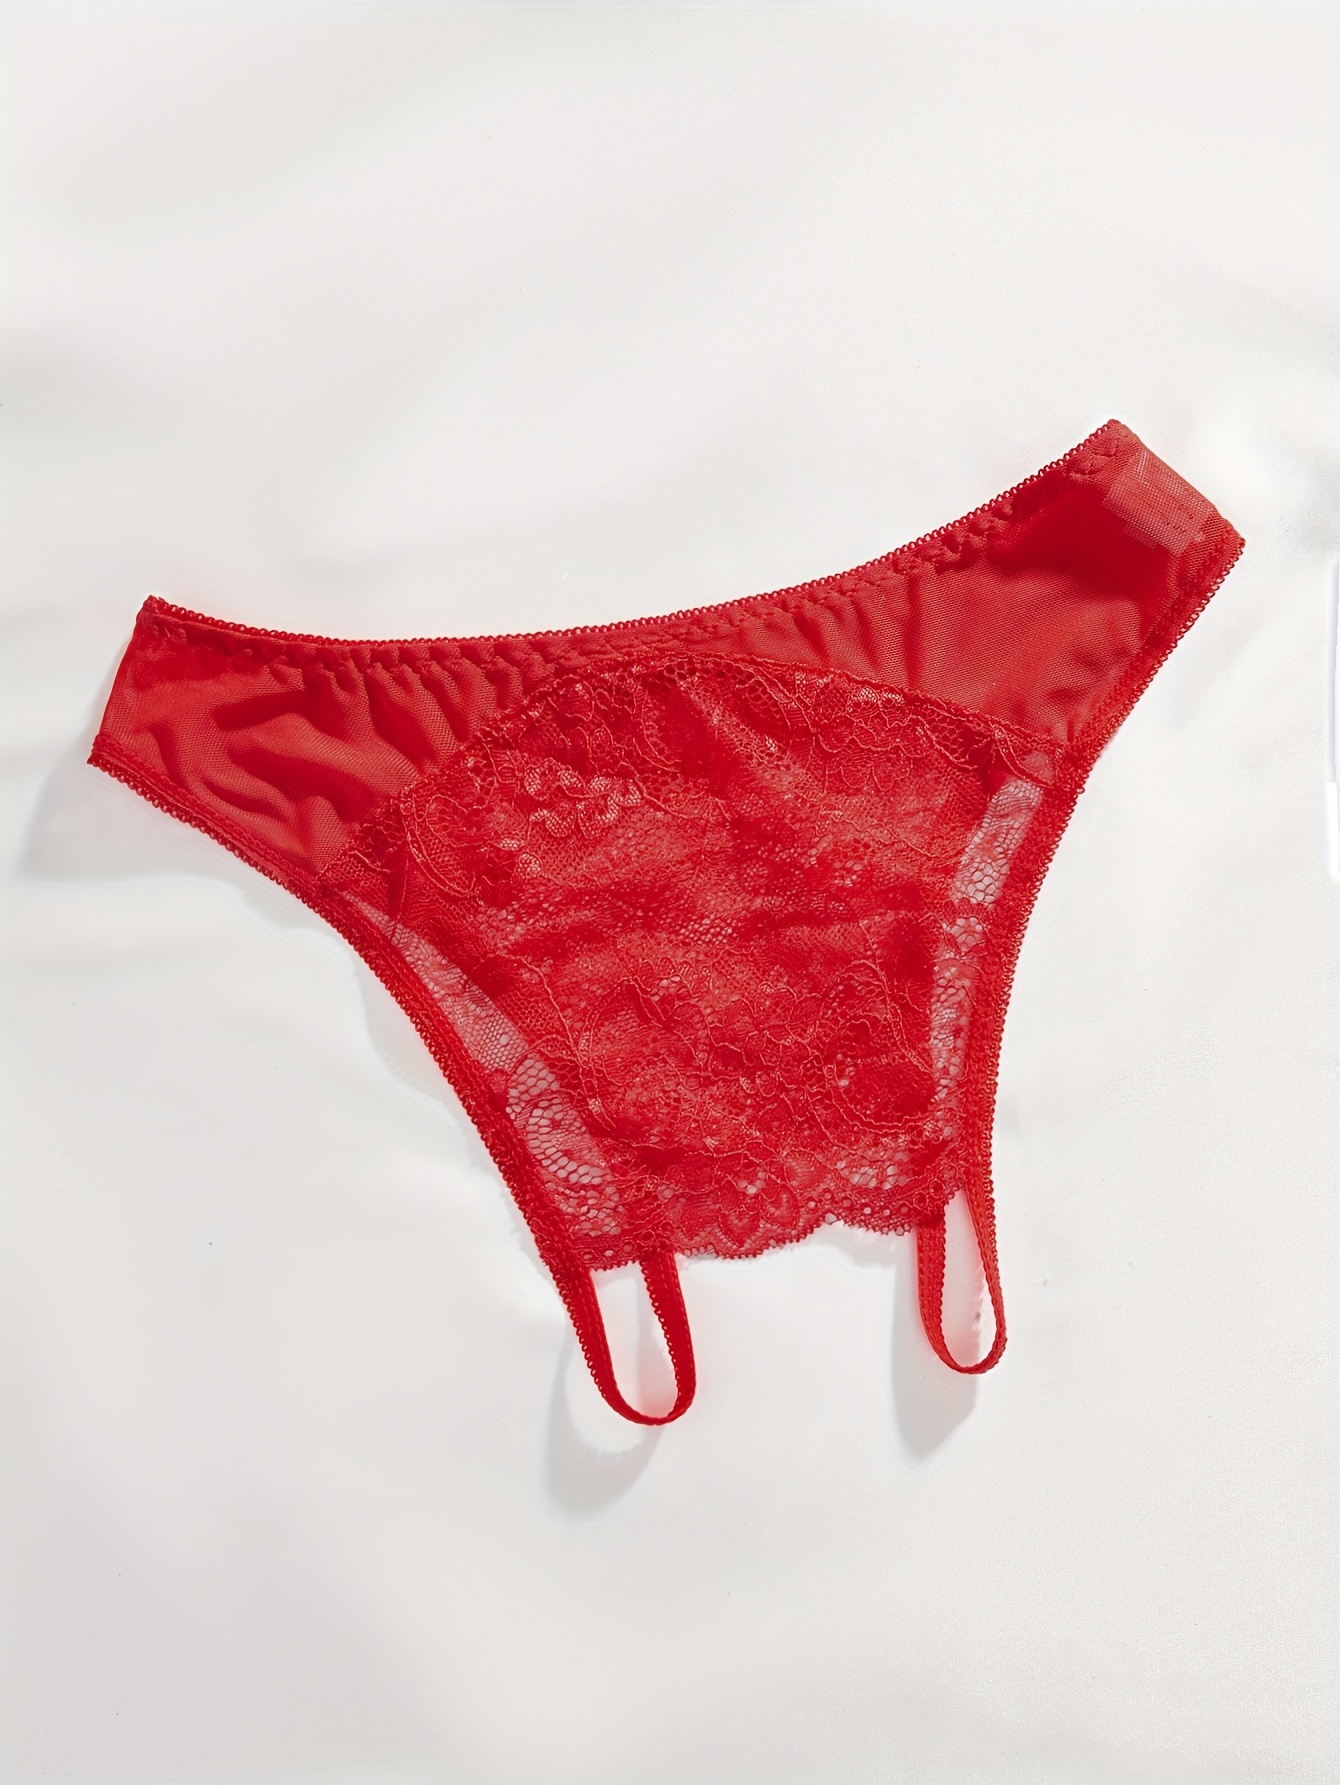 9 Attractive Red Panties for Women  Red lace panties, Panty design,  Chiffon bottoms